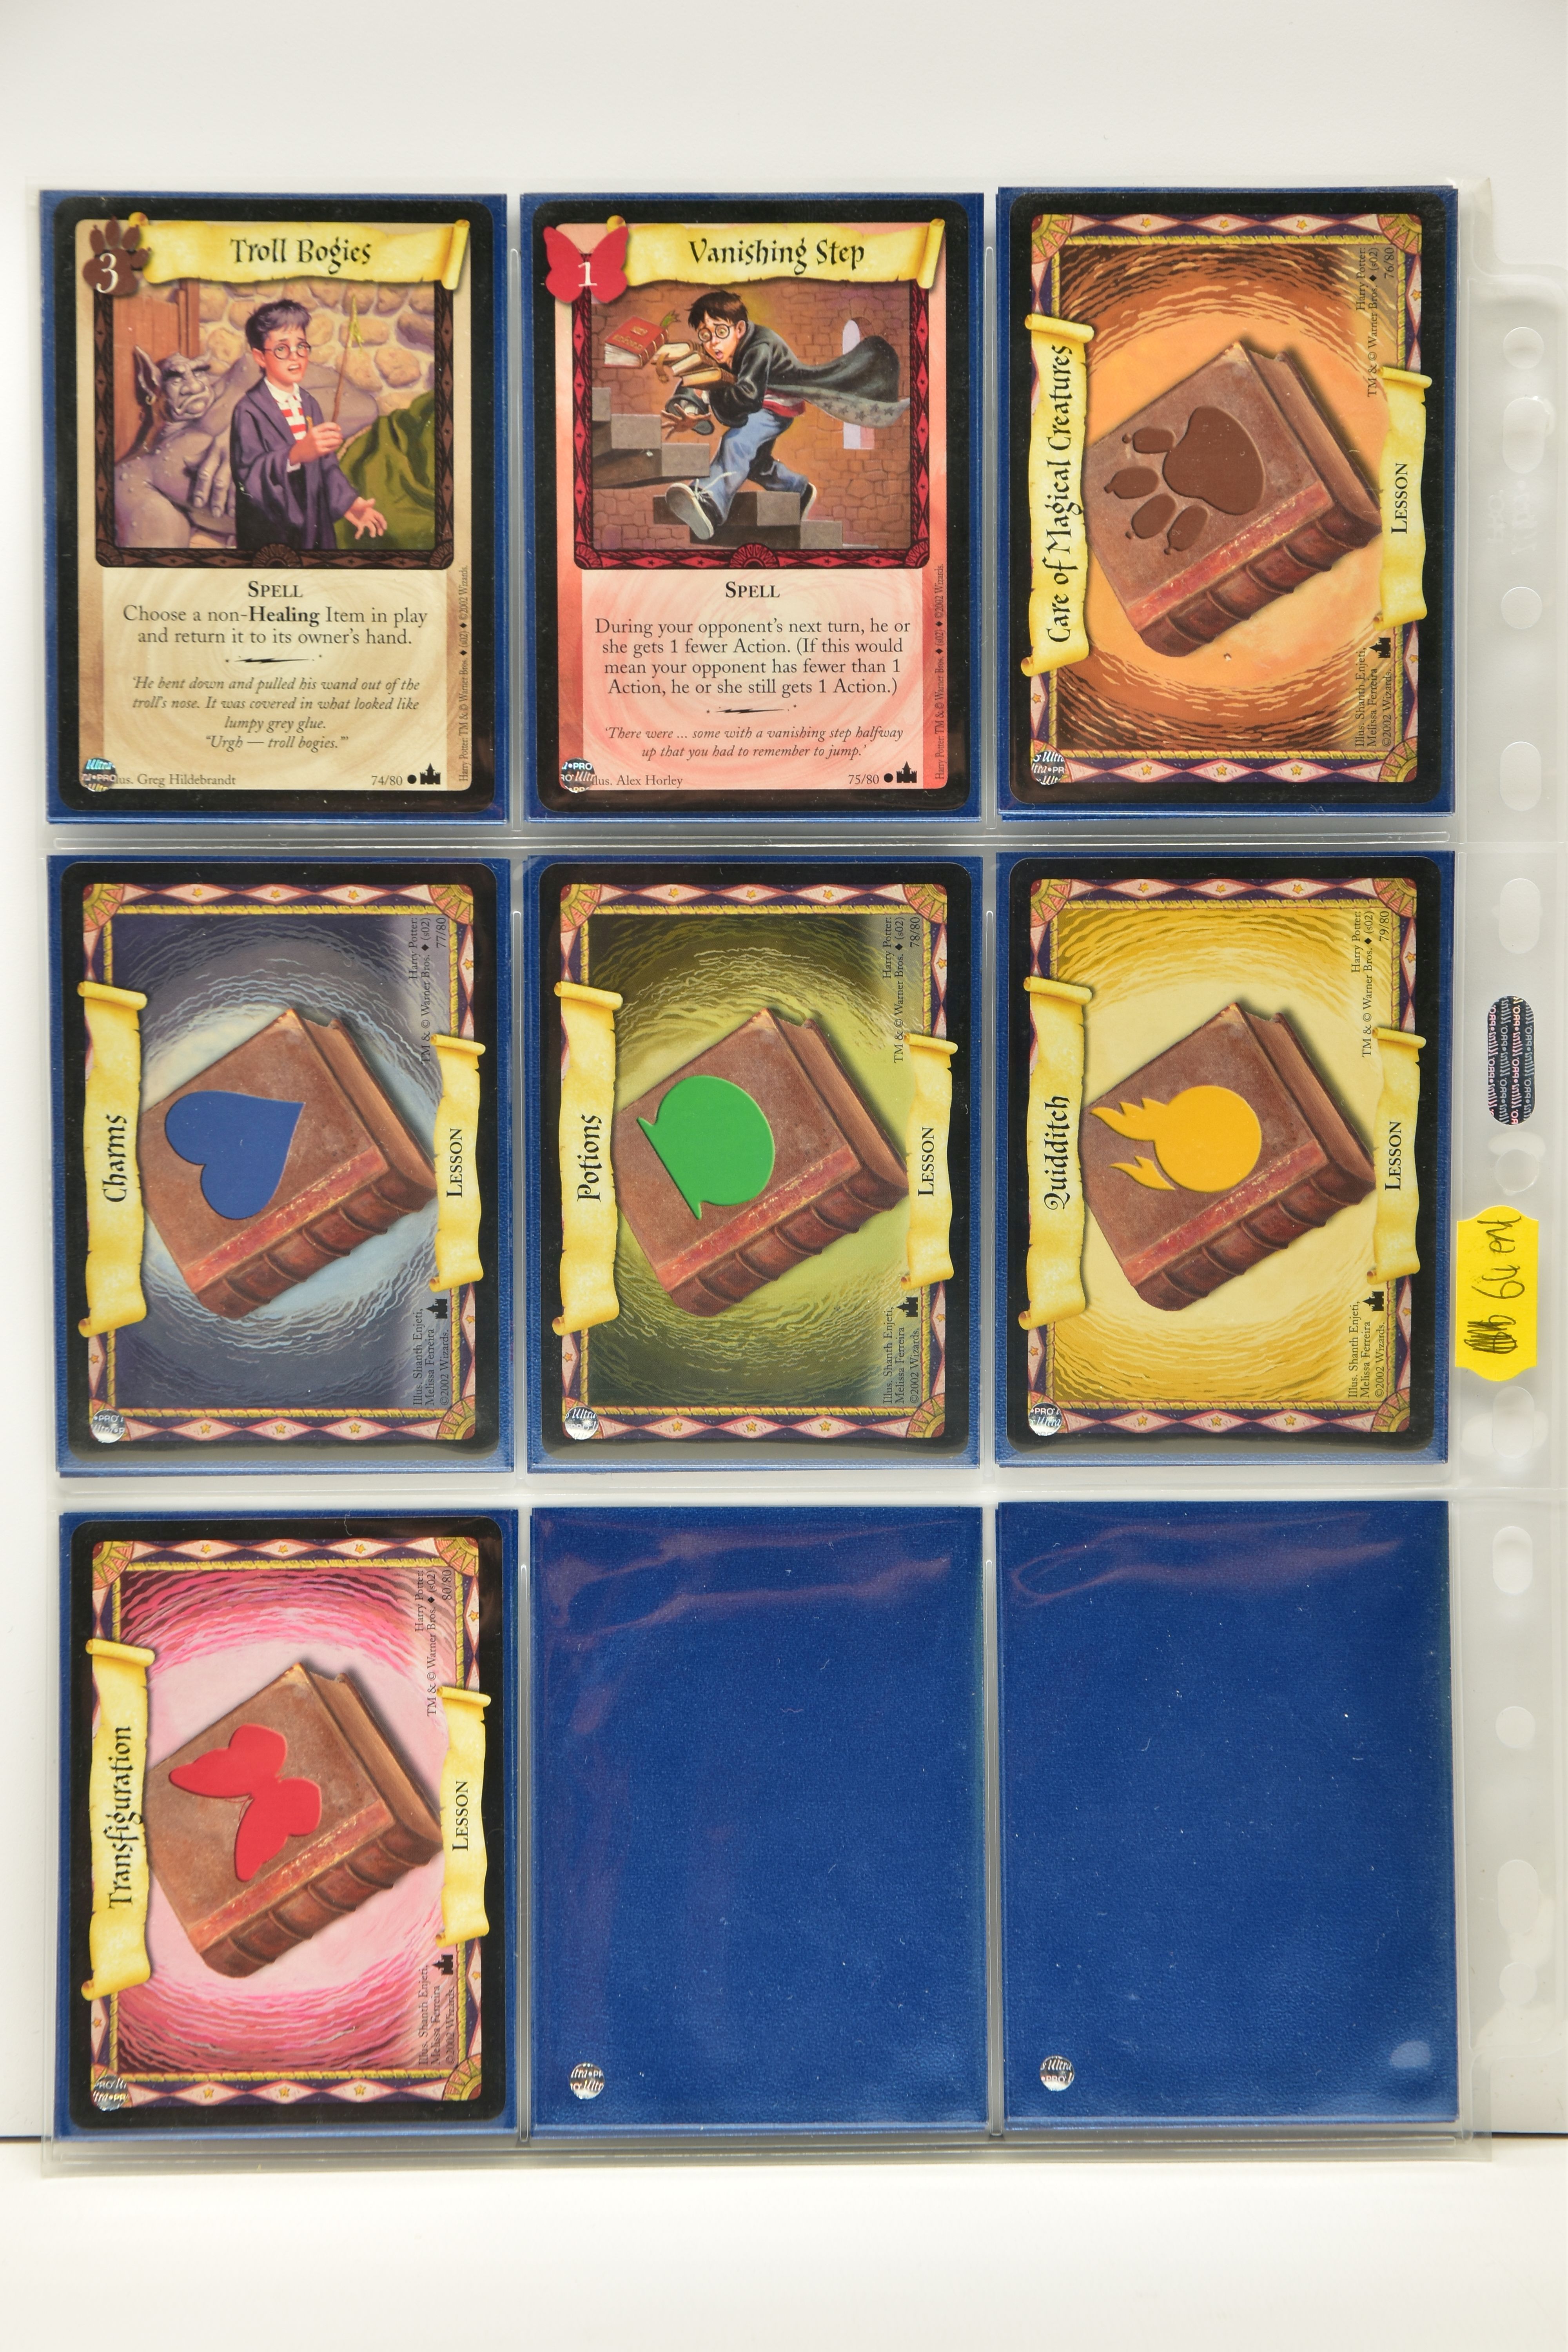 COMPLETE HARRY POTTER ADVENTURES AT HOGWARTS SET, all cards are present (including holo variants), - Image 13 of 13